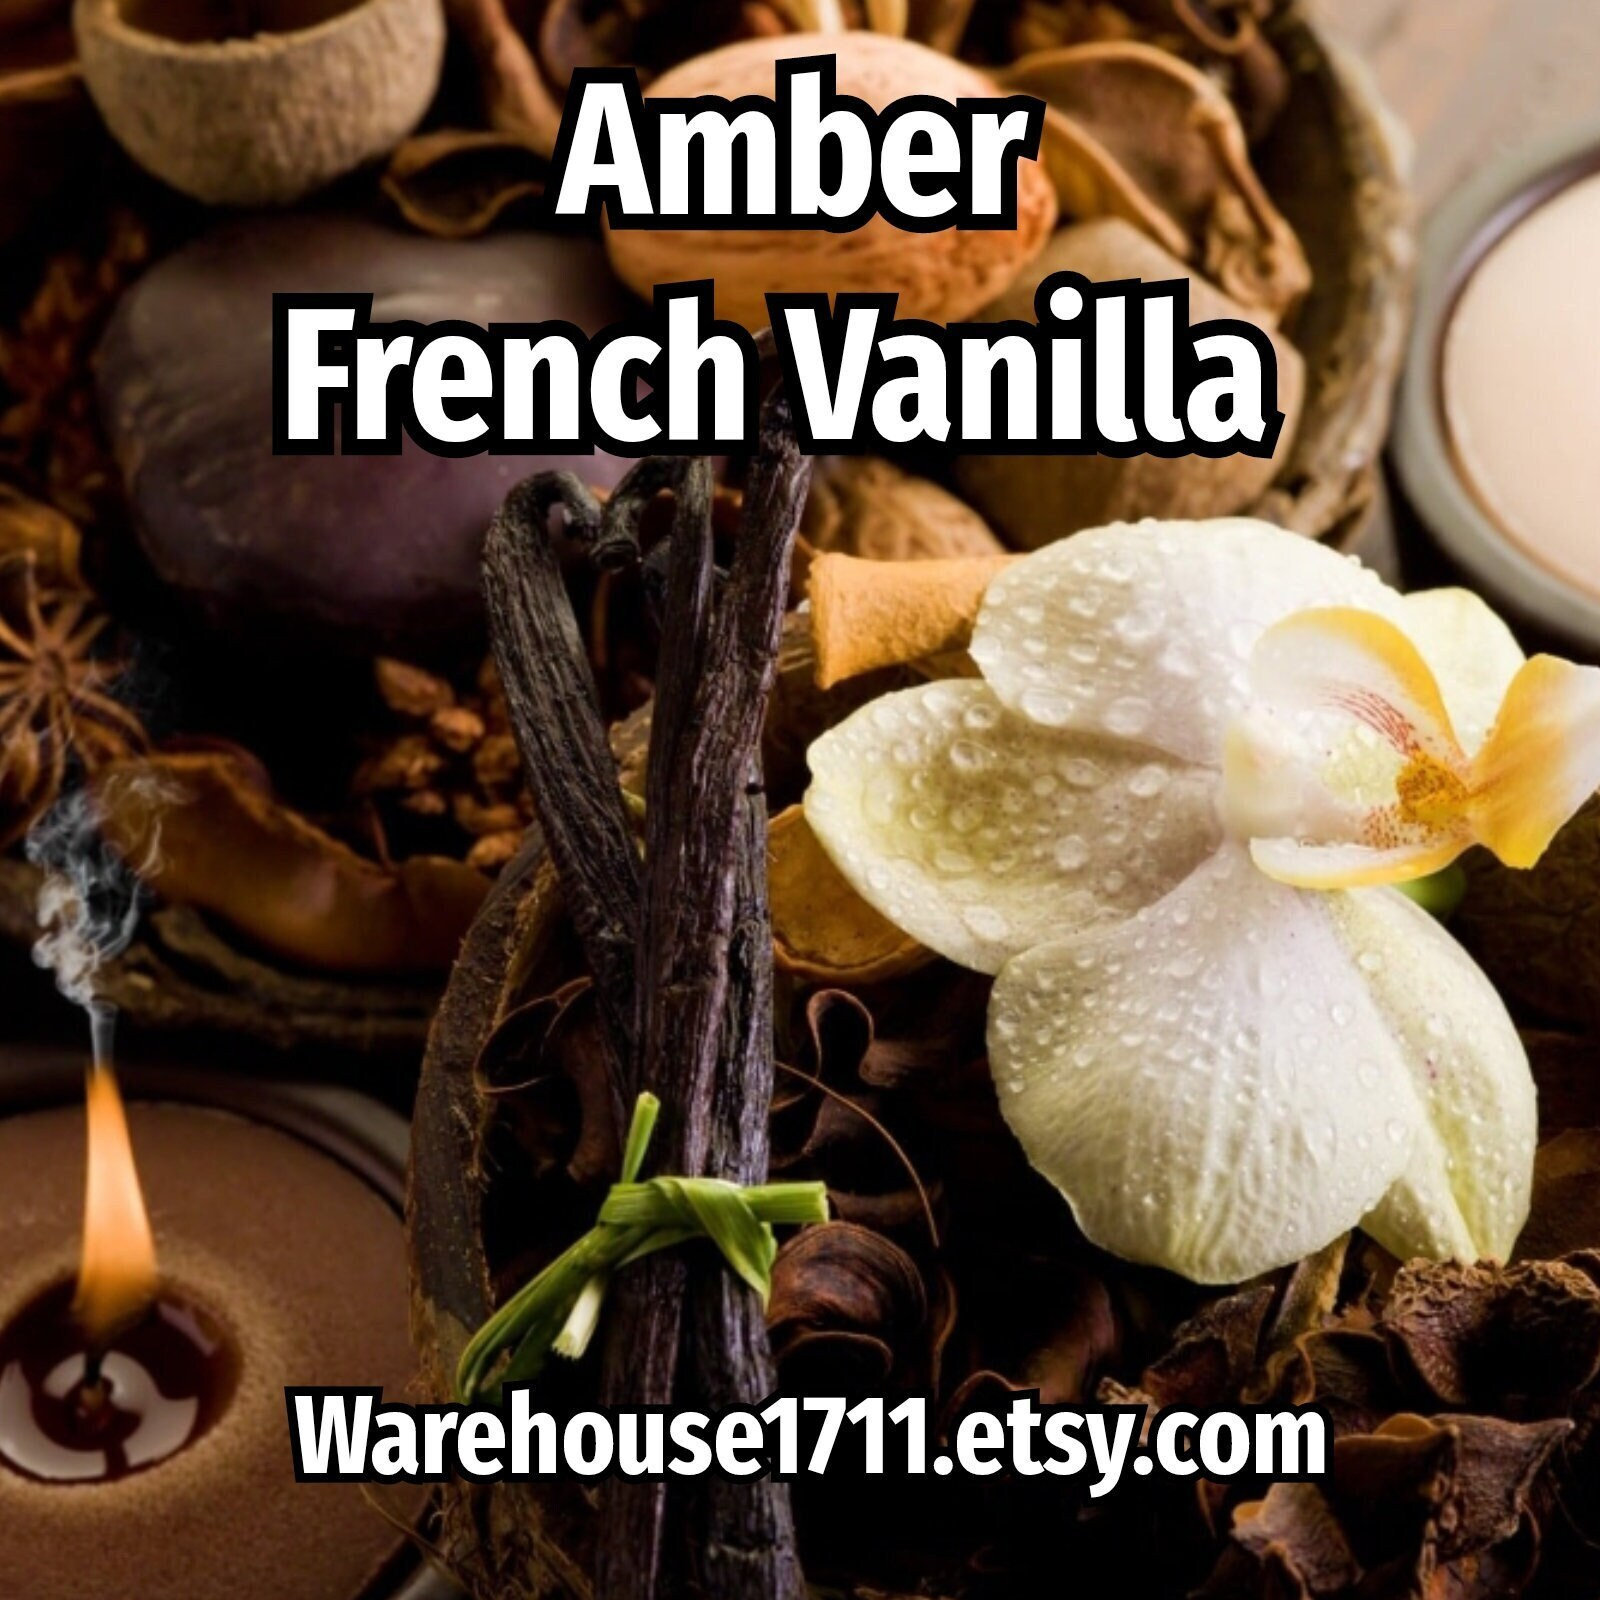 Best Amber Essential Oil, Pure Organic Therapeutic Grade, Pogostemon  Cablin, Benefits for Diffuser, Skin, Candles, Soap 